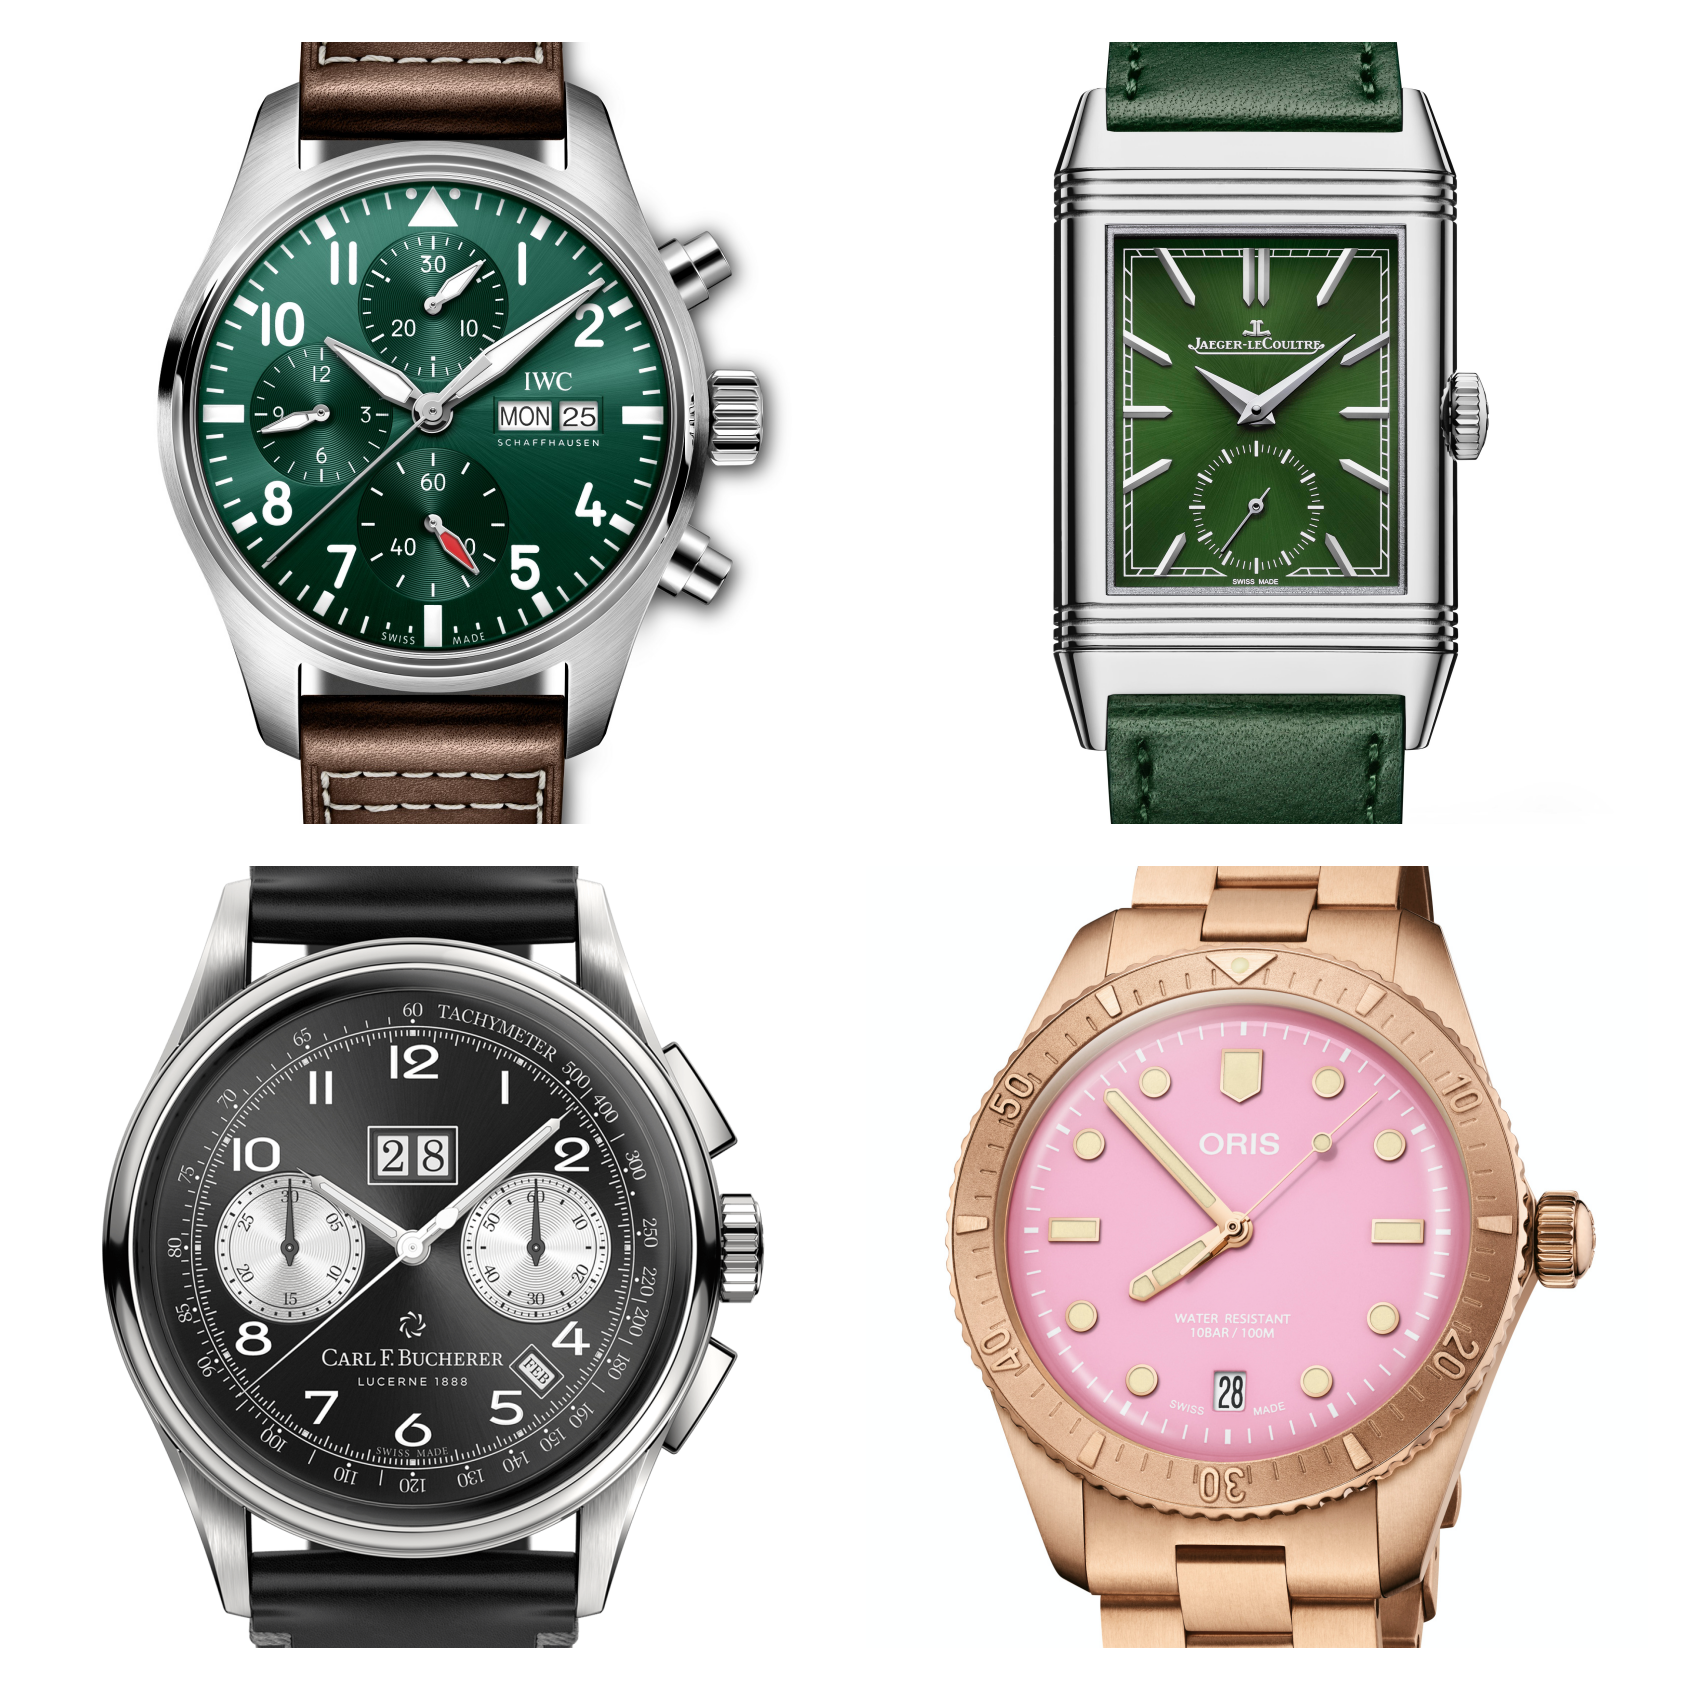 10 luxury watches you can buy for less than $10k | Zaeger Magazine